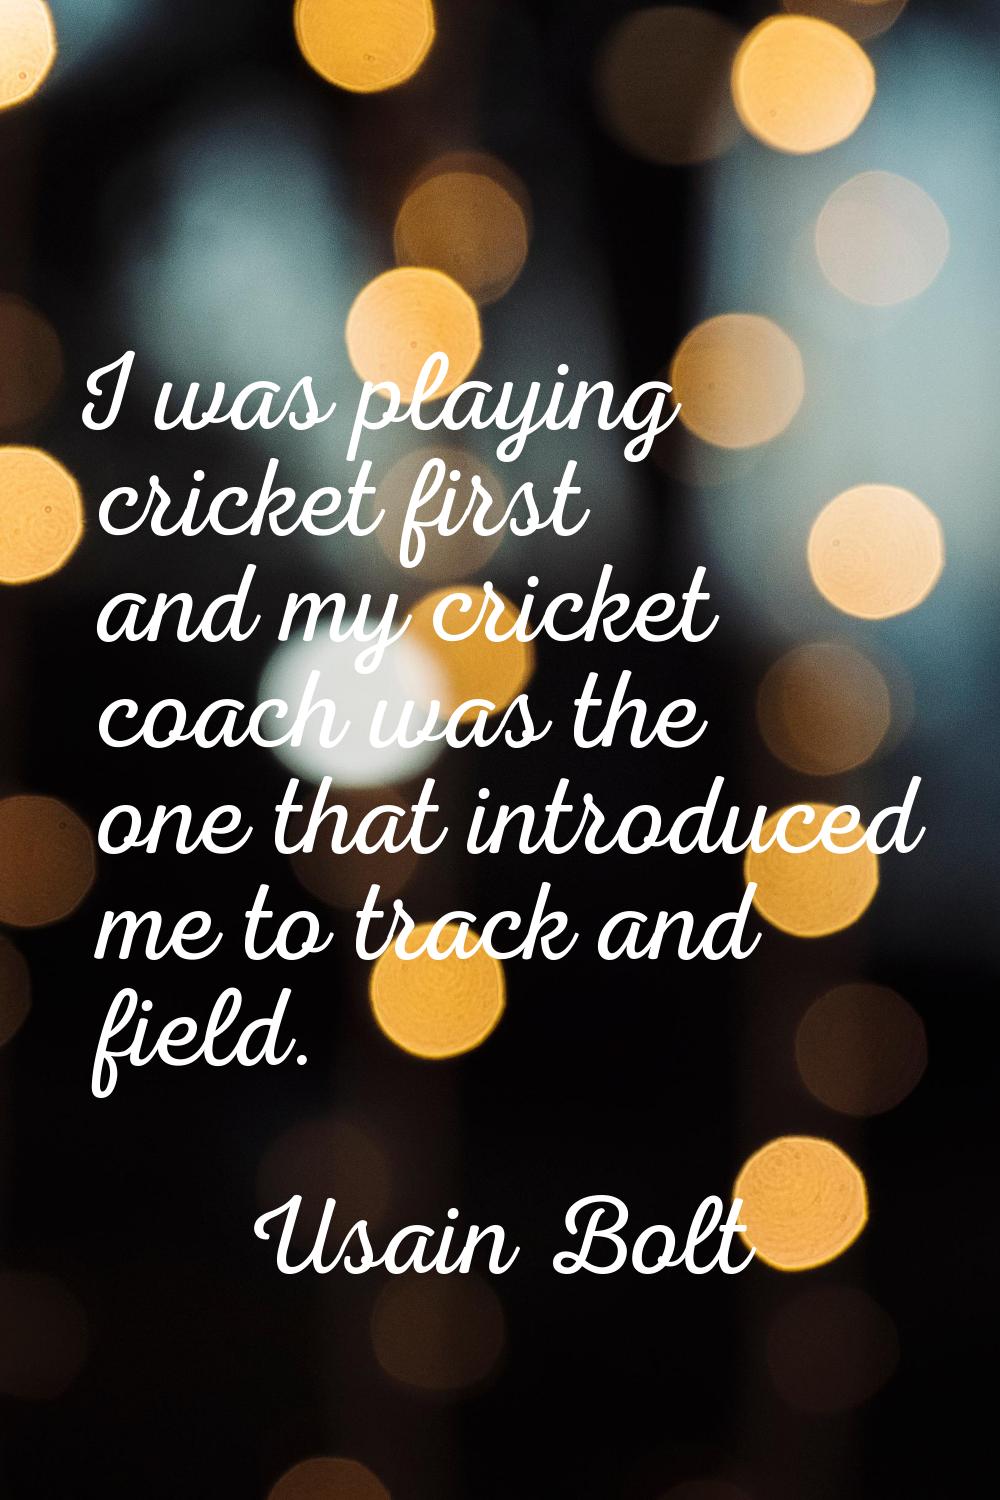 I was playing cricket first and my cricket coach was the one that introduced me to track and field.